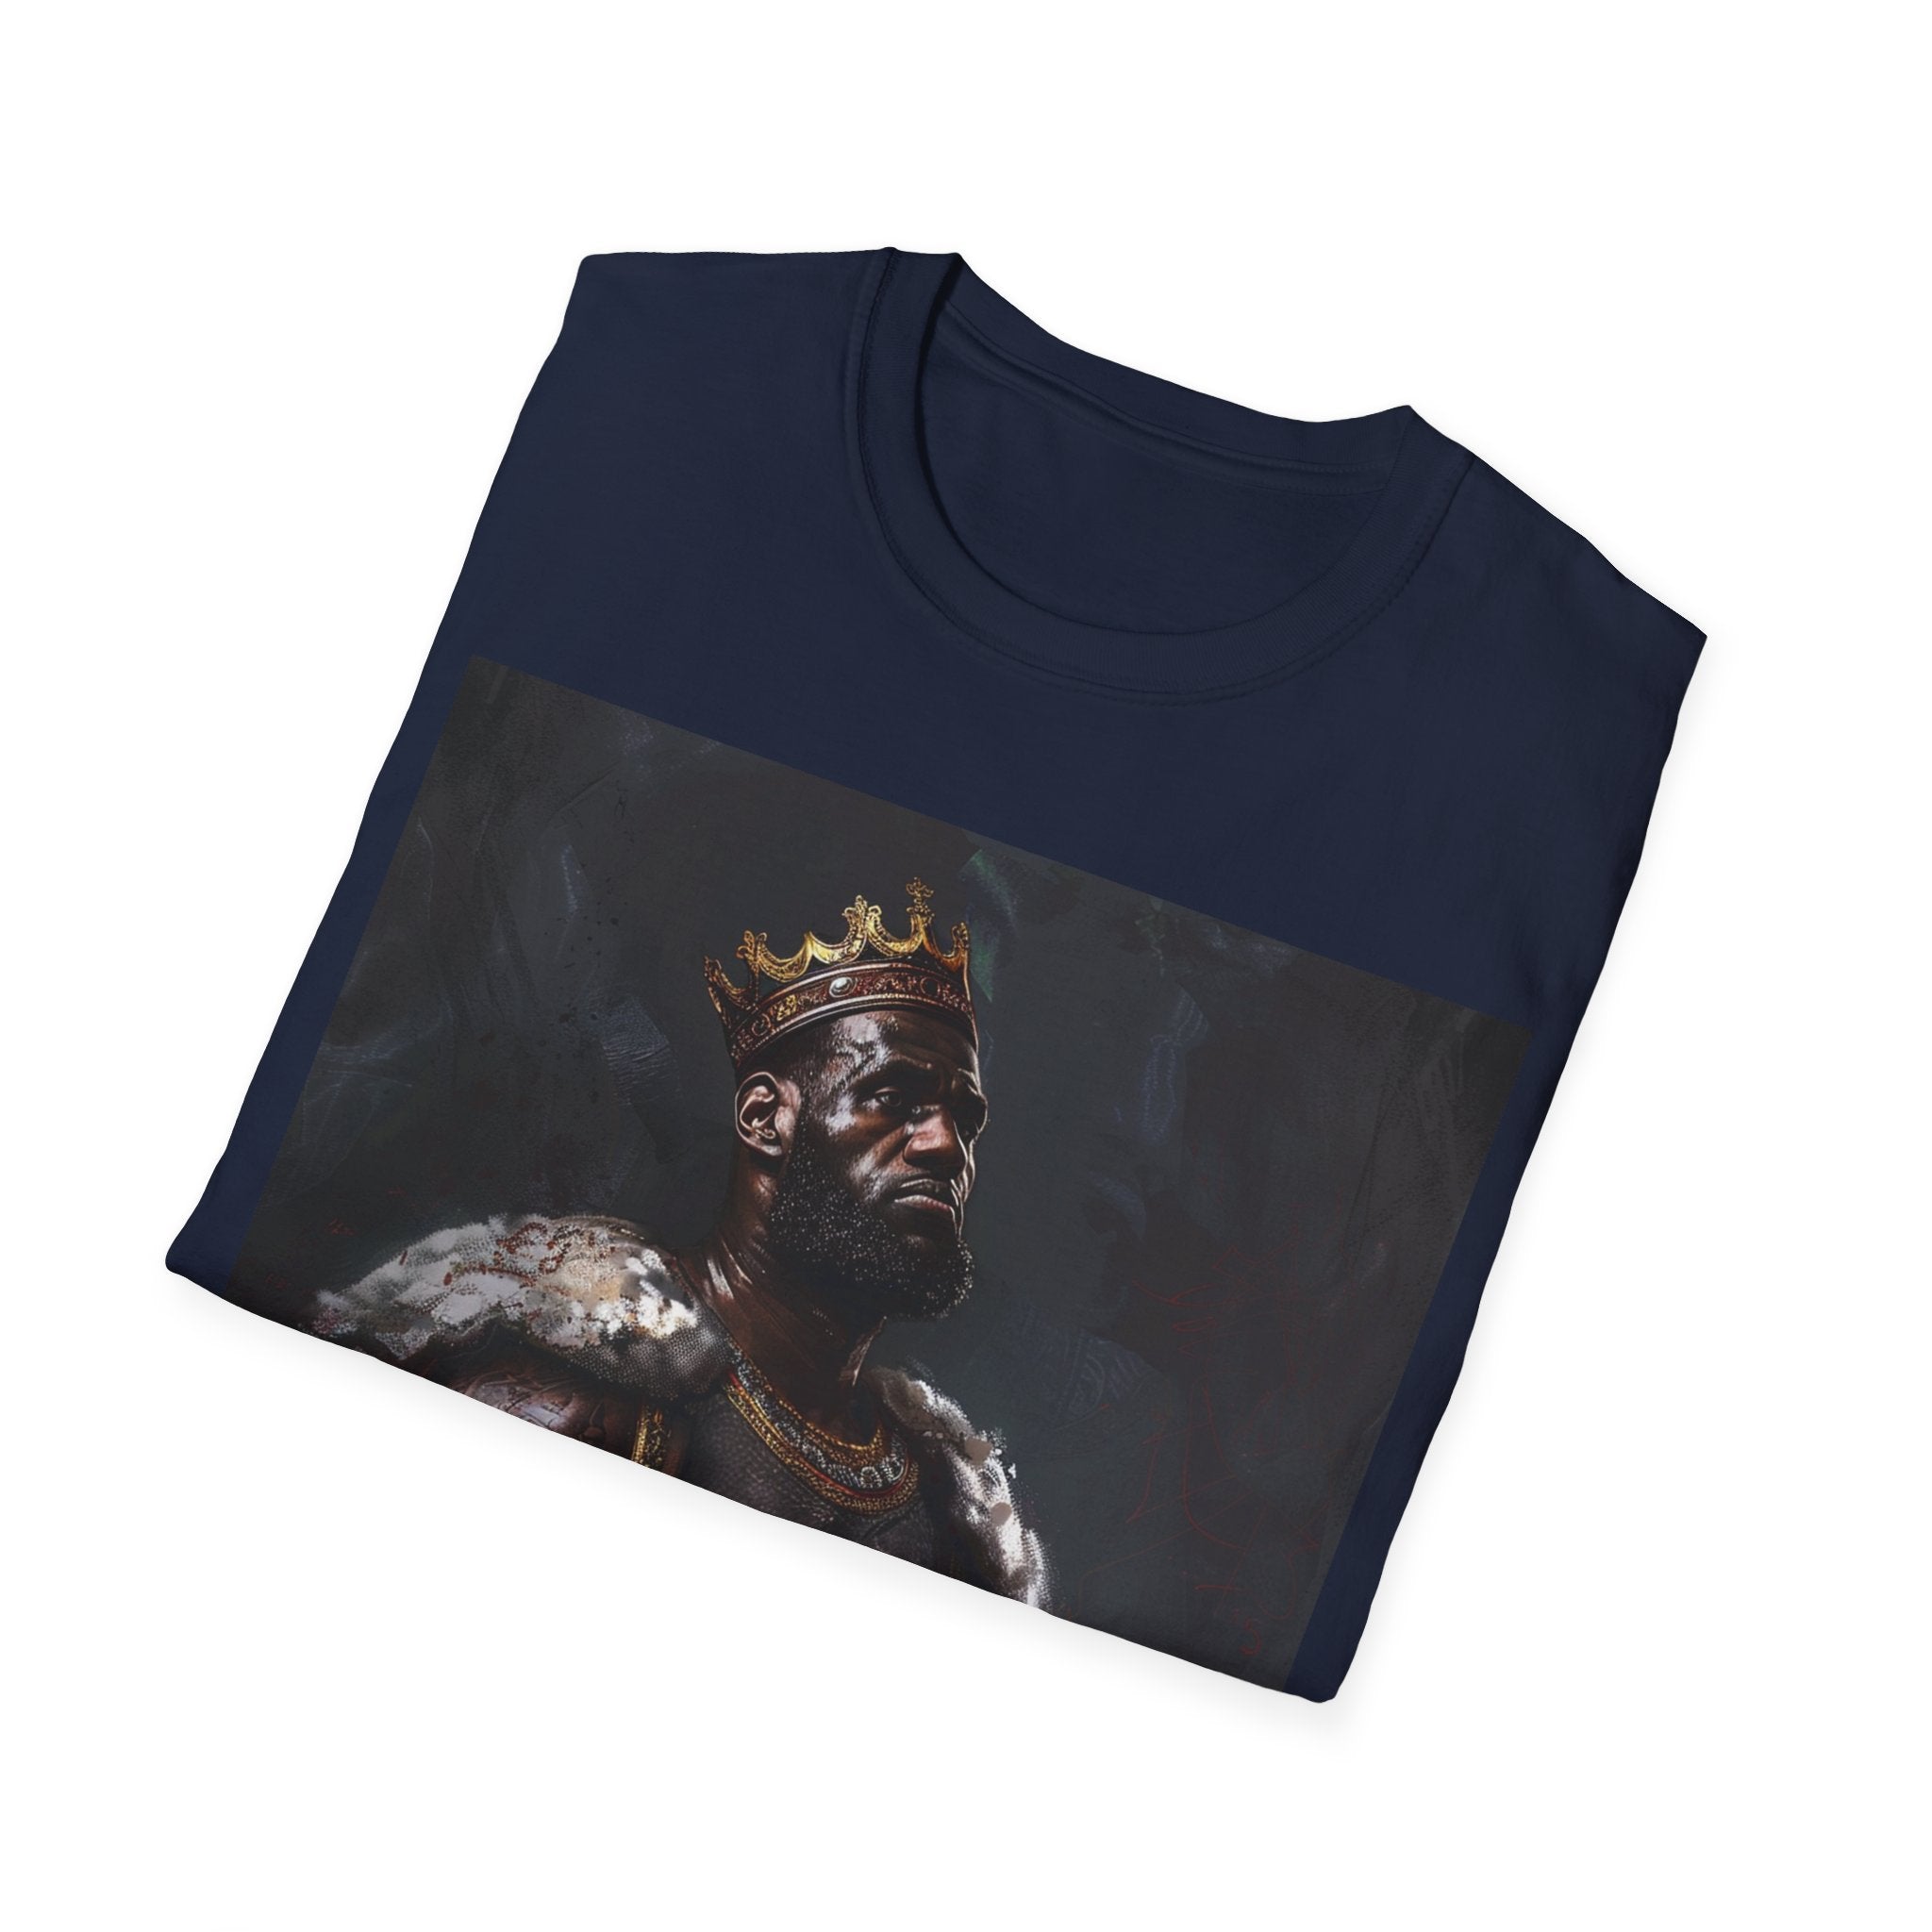 The image showcases the sophisticated unisex softstyle t-shirt, featuring a detailed and artistically rendered portrait of King James in the style of a Renaissance painting. The quality of the softstyle material is evident, promising comfort and durability, while the design speaks to the blend of sports legacy and classical elegance. Inspired by Lebron James